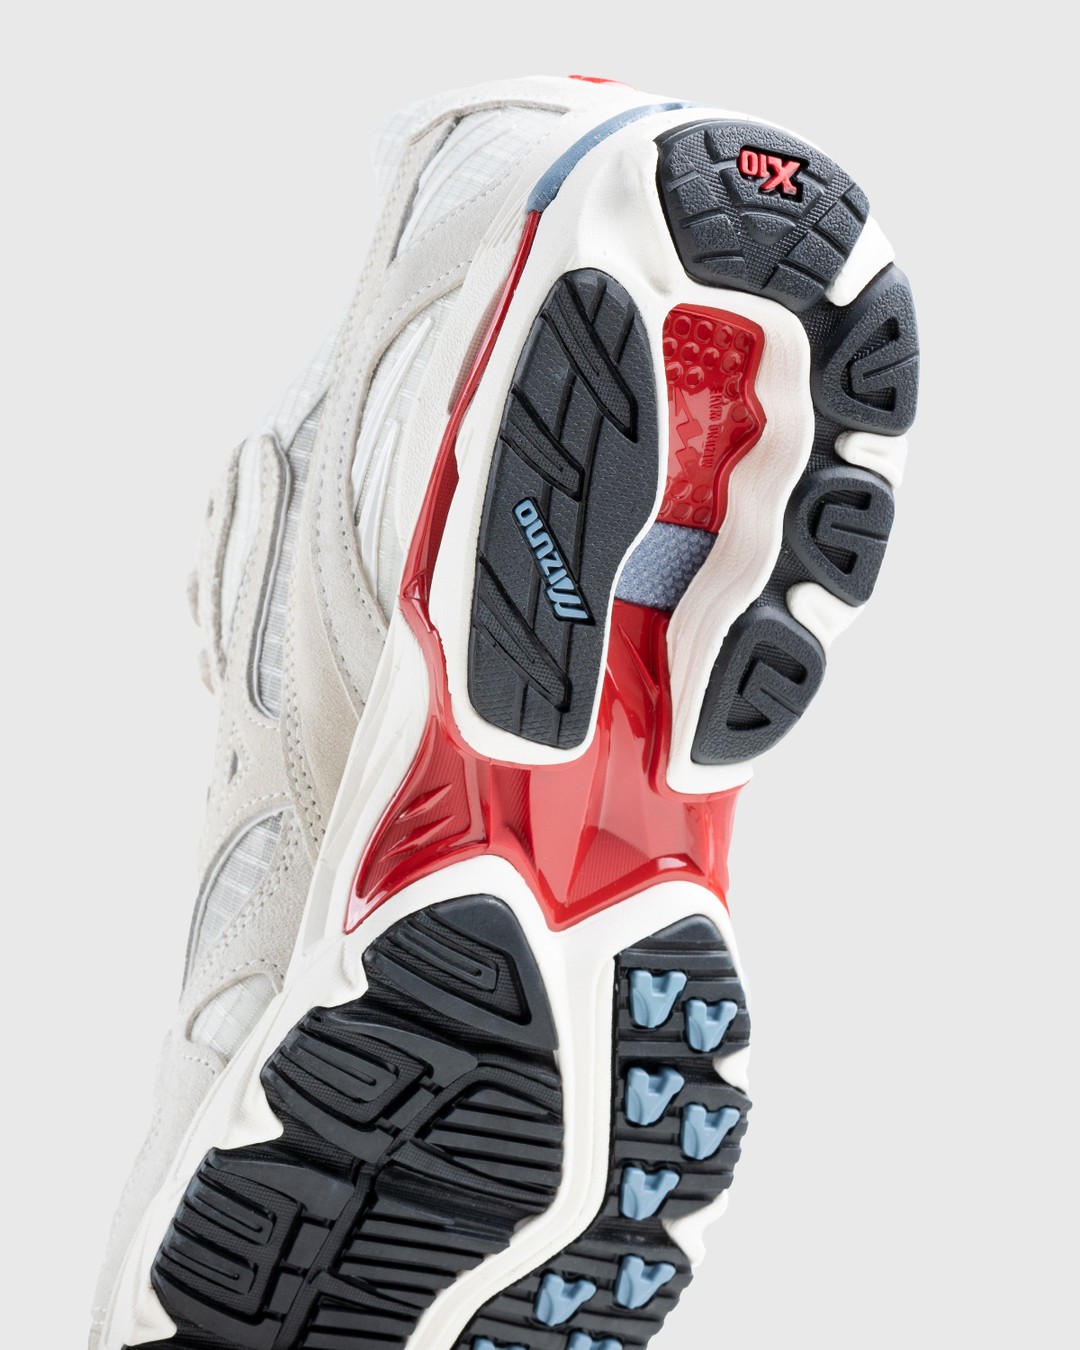 Mizuno x Highsnobiety – Wave Rider 10 White/Red - Low Top Sneakers - Grey - Image 6